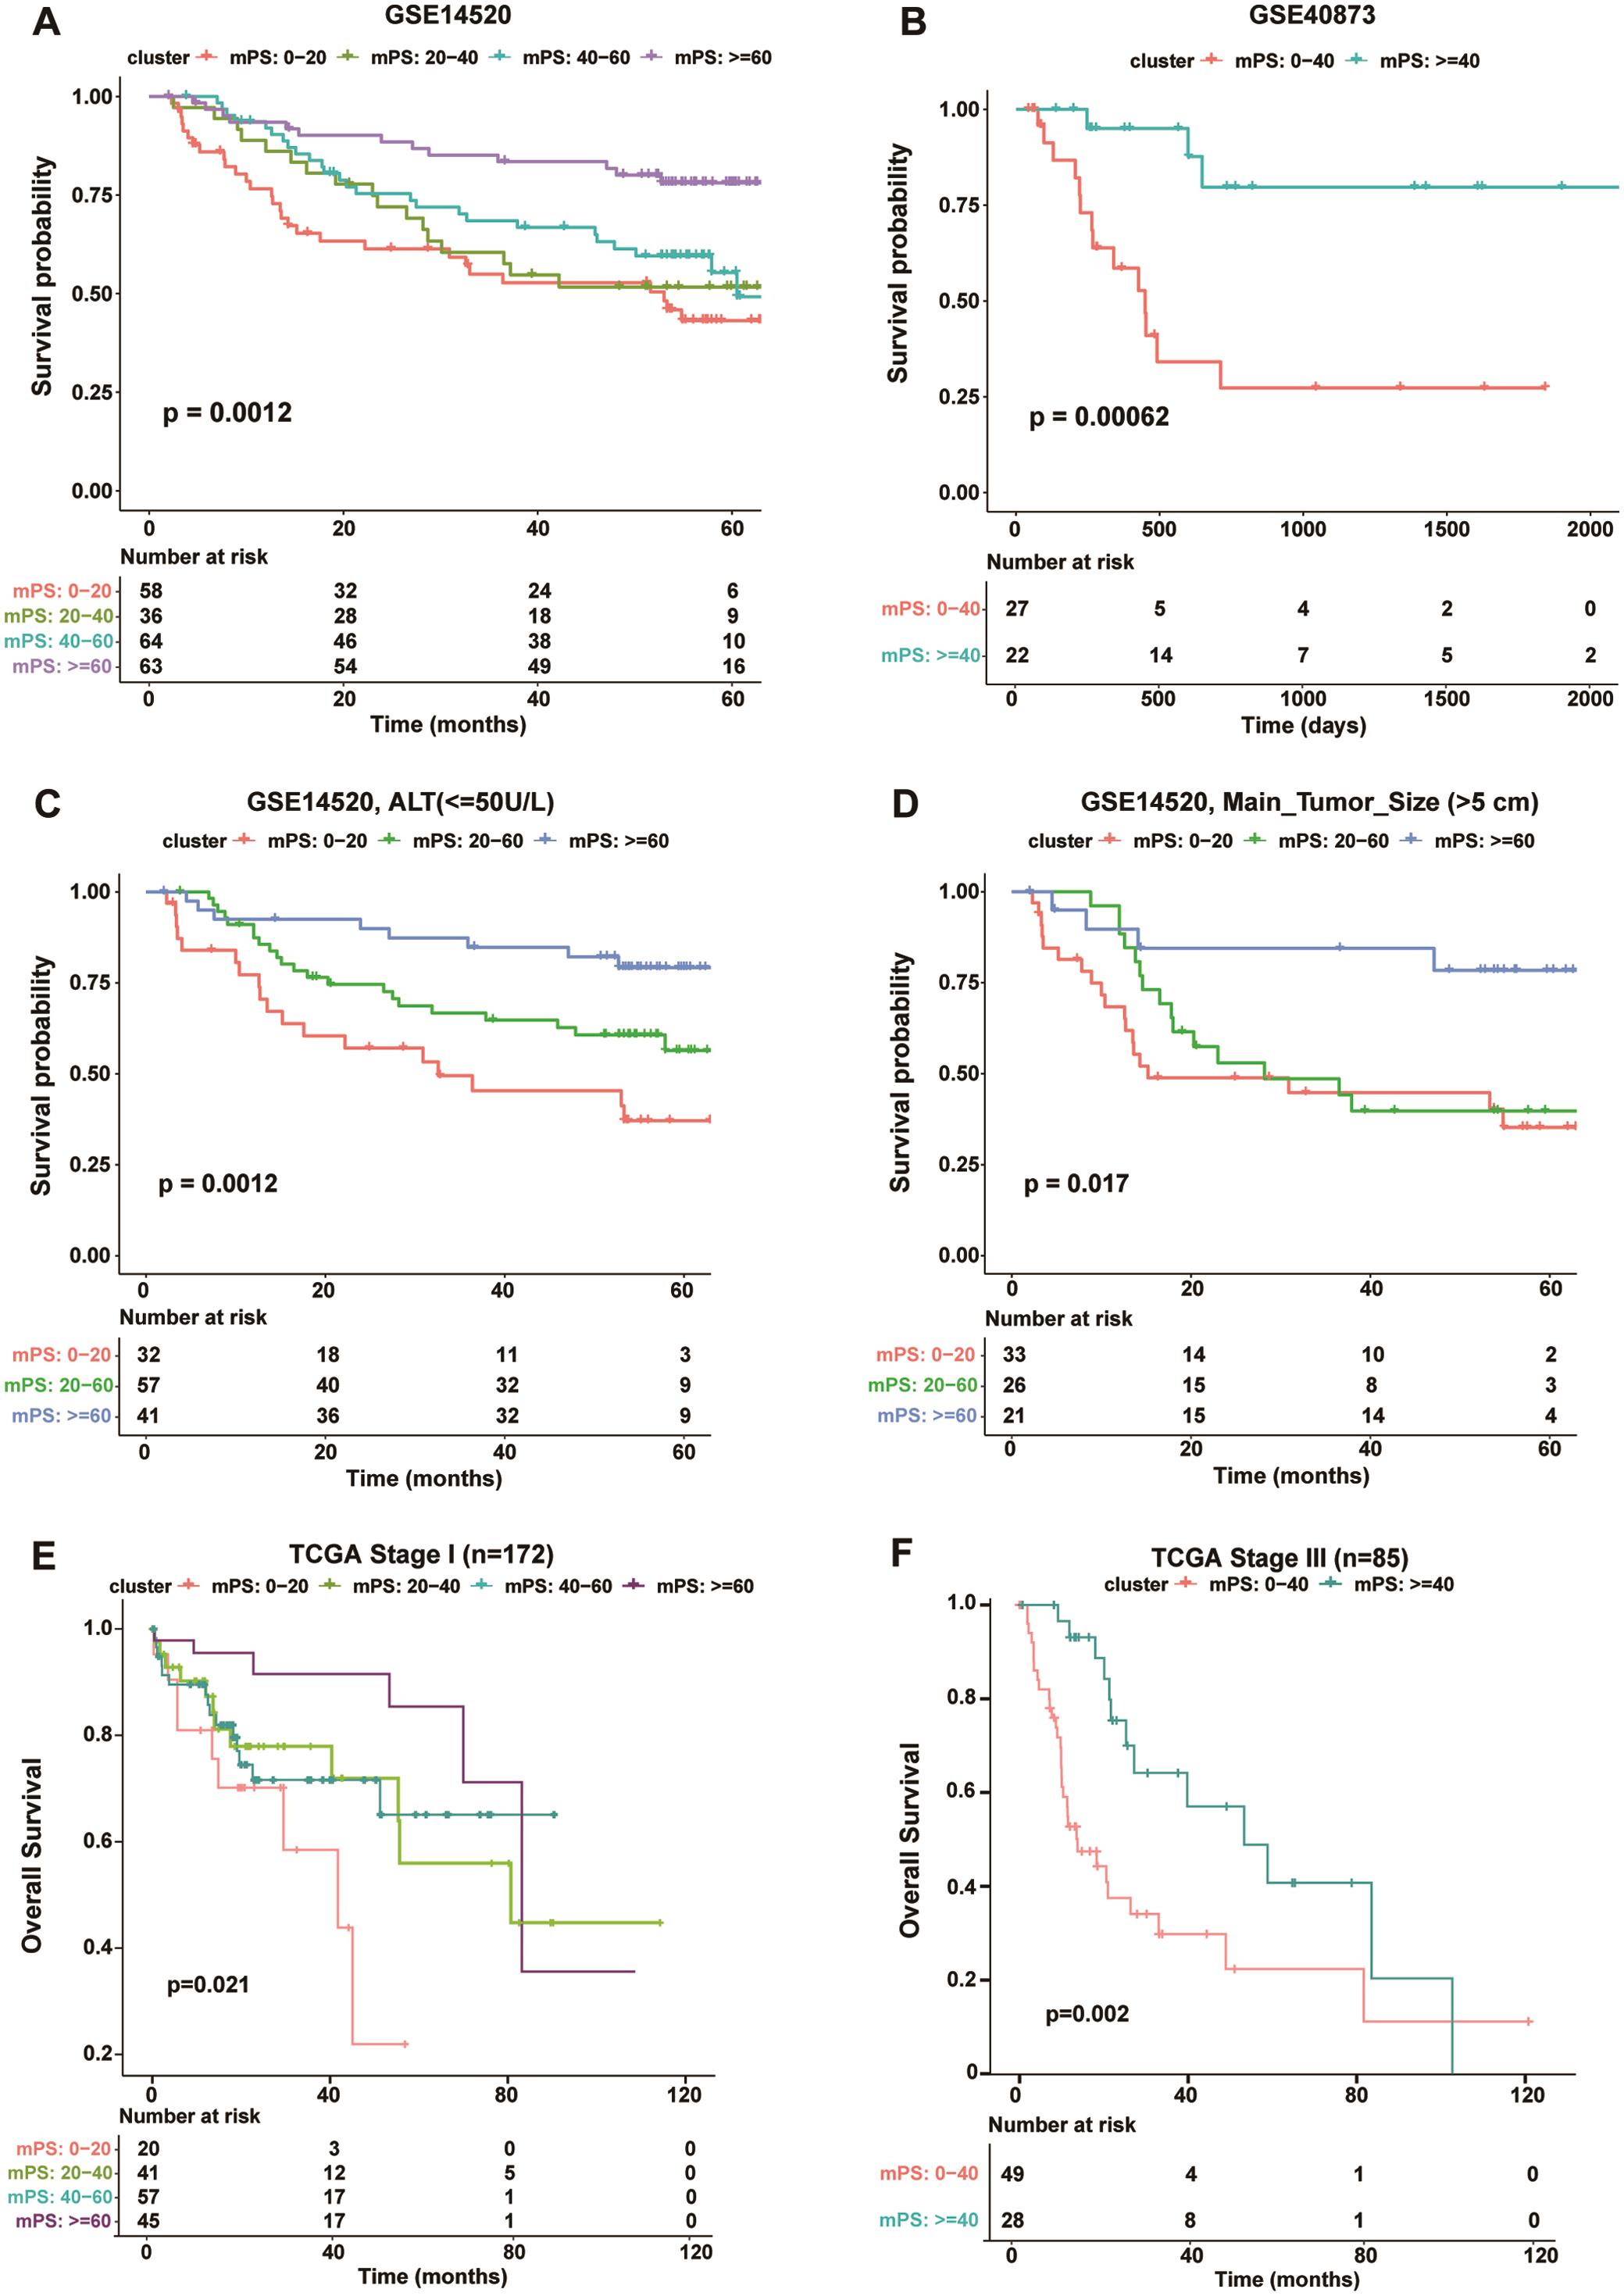 The mHPS predicts prognosis of independent HCC cohorts.